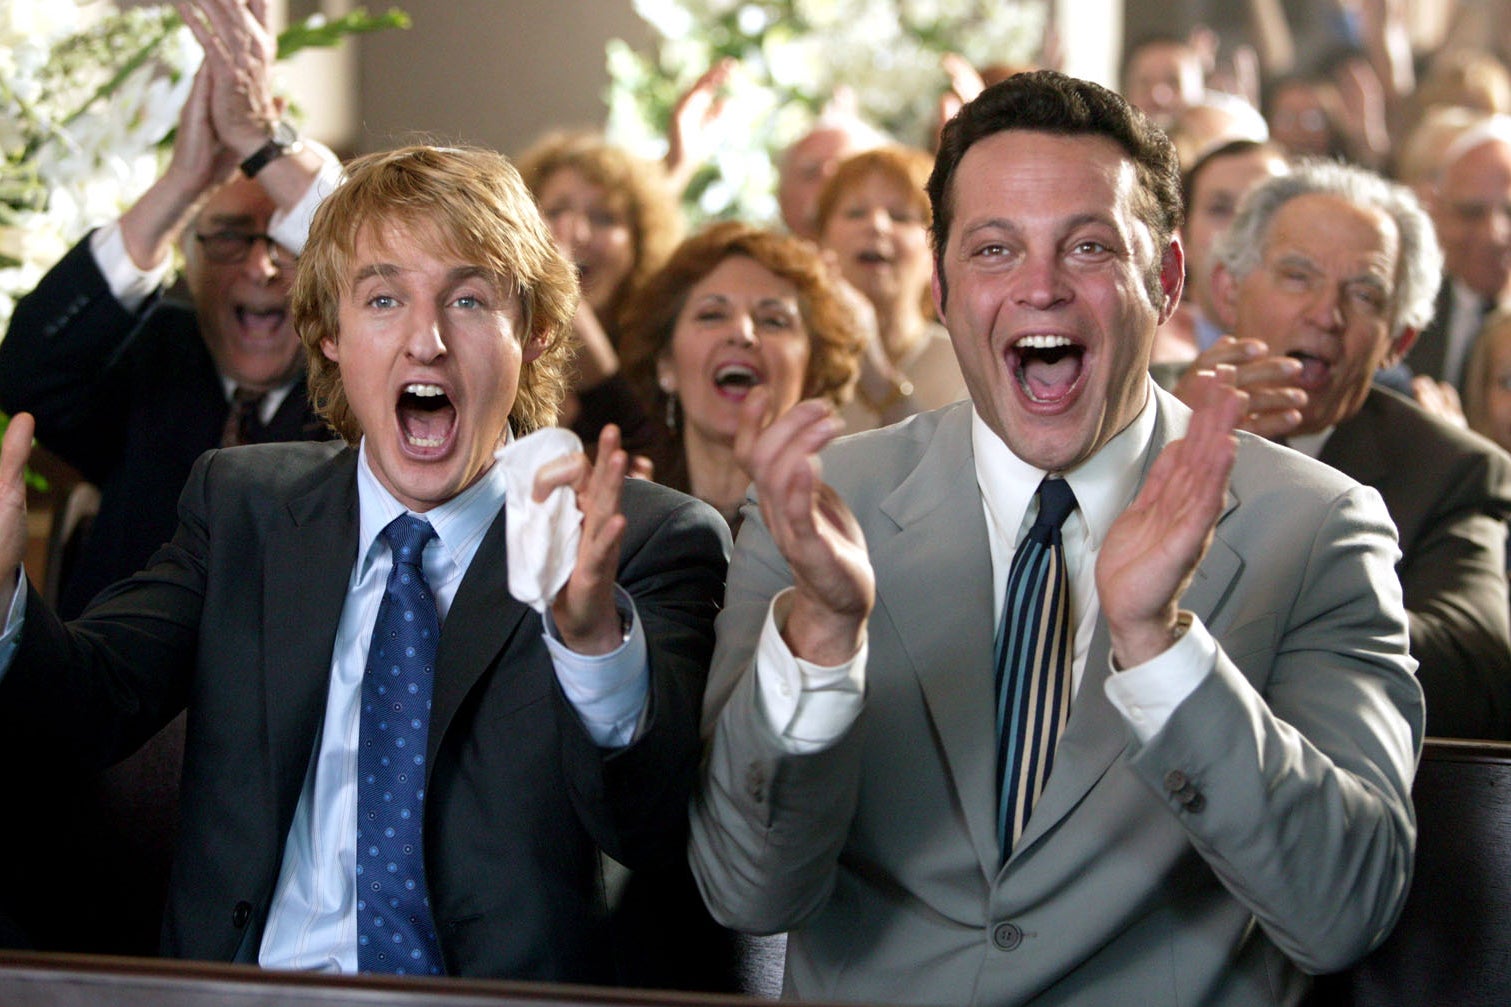 Owen Wilson and Vince Vaughn, in suit jackets and ties in a wedding pew, cheer excitedly.